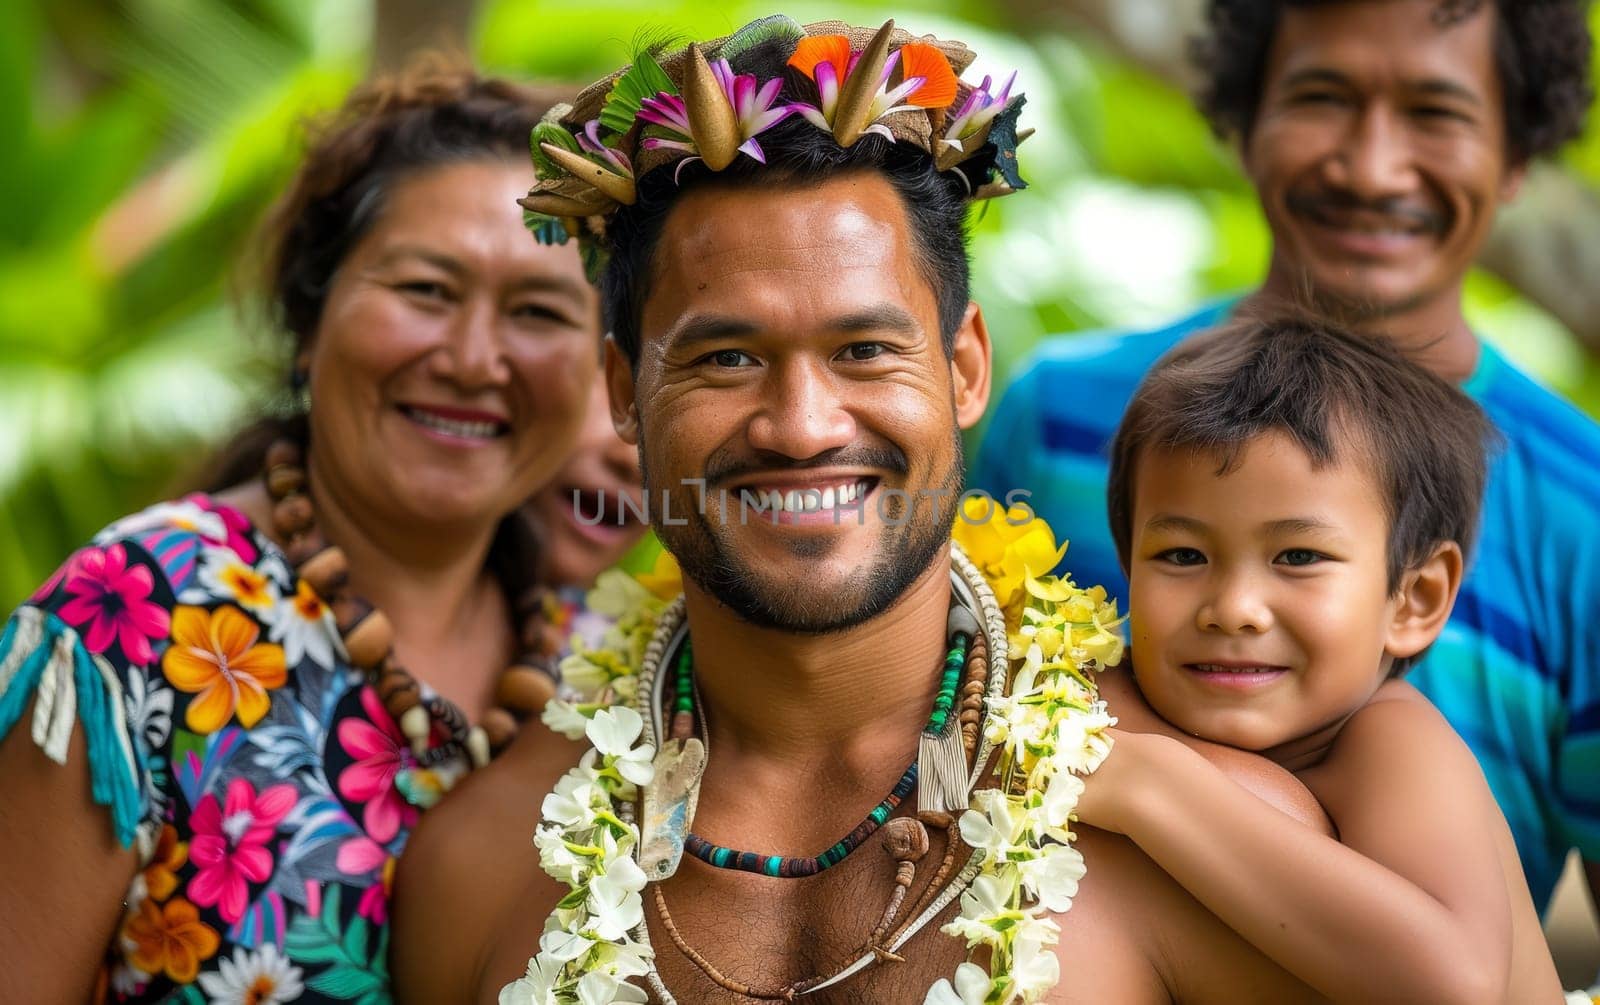 Portrait of a Samoan man with a bare torso and a traditional wreath, surrounded by his family in a natural setting